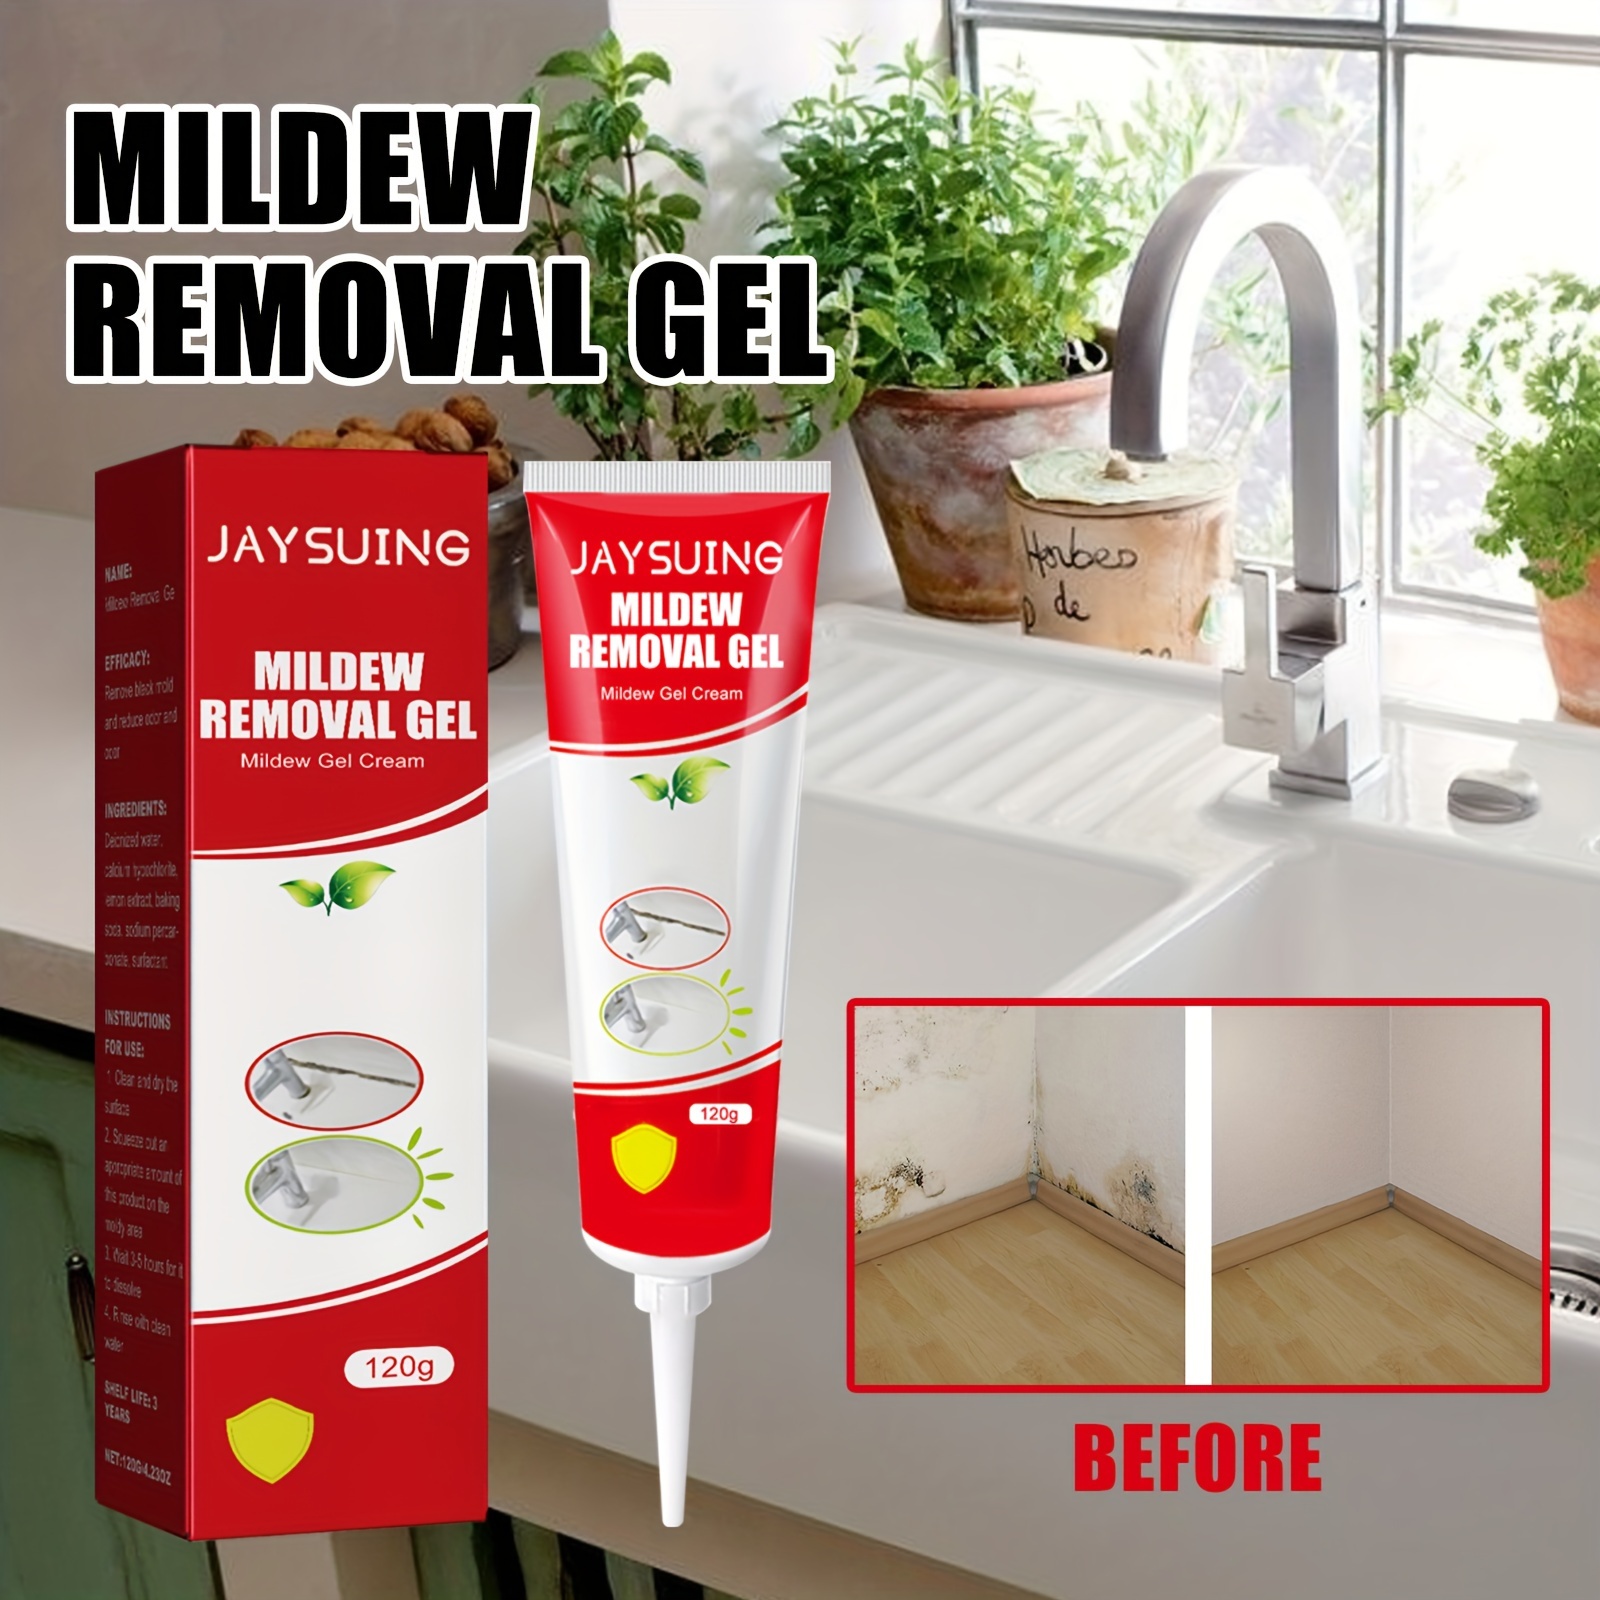 Mold Remover Gel, Household Grout Cleaner for Washing Machine, Refrigerator  Strips, Tiles Grout Bathroom Home Kitchen Sinks